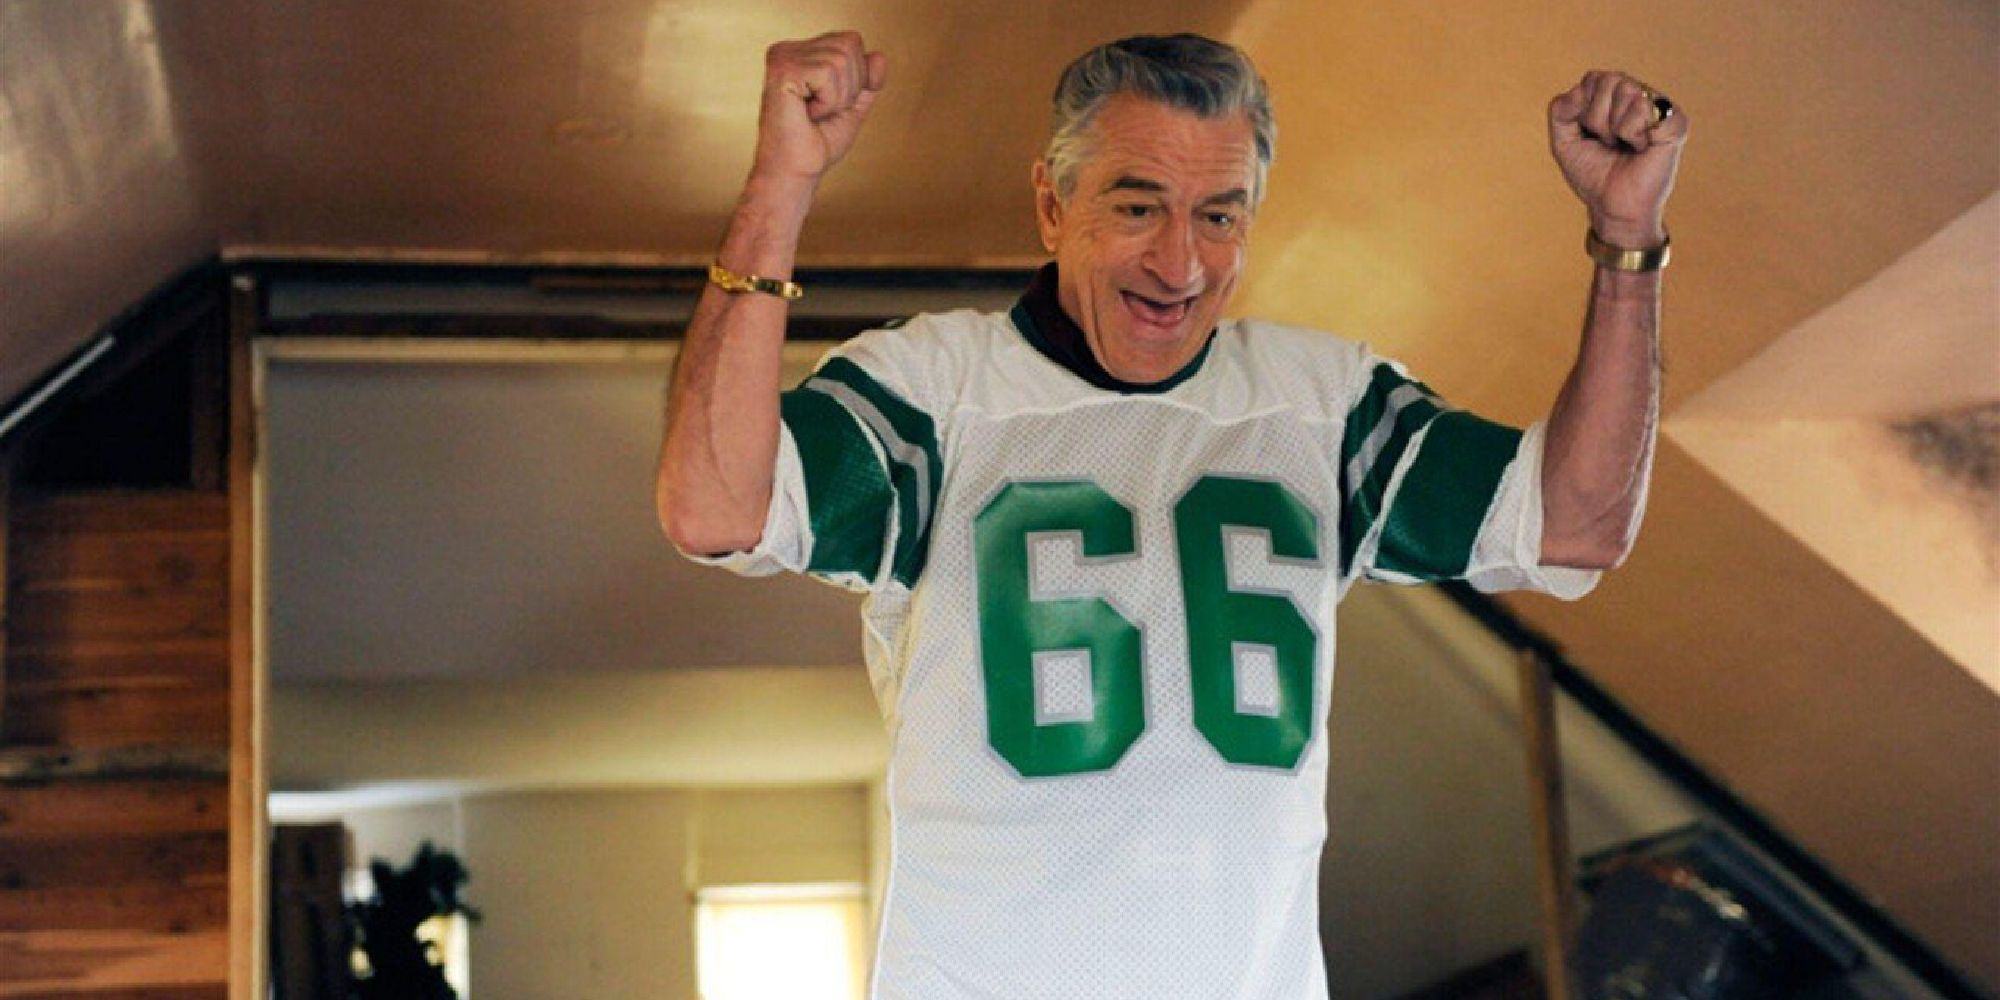 Robert De Niro as Pat Solatano Sr. wearing a football jersey and raising his hands in celebration in Silver Linings Playbook - 2012